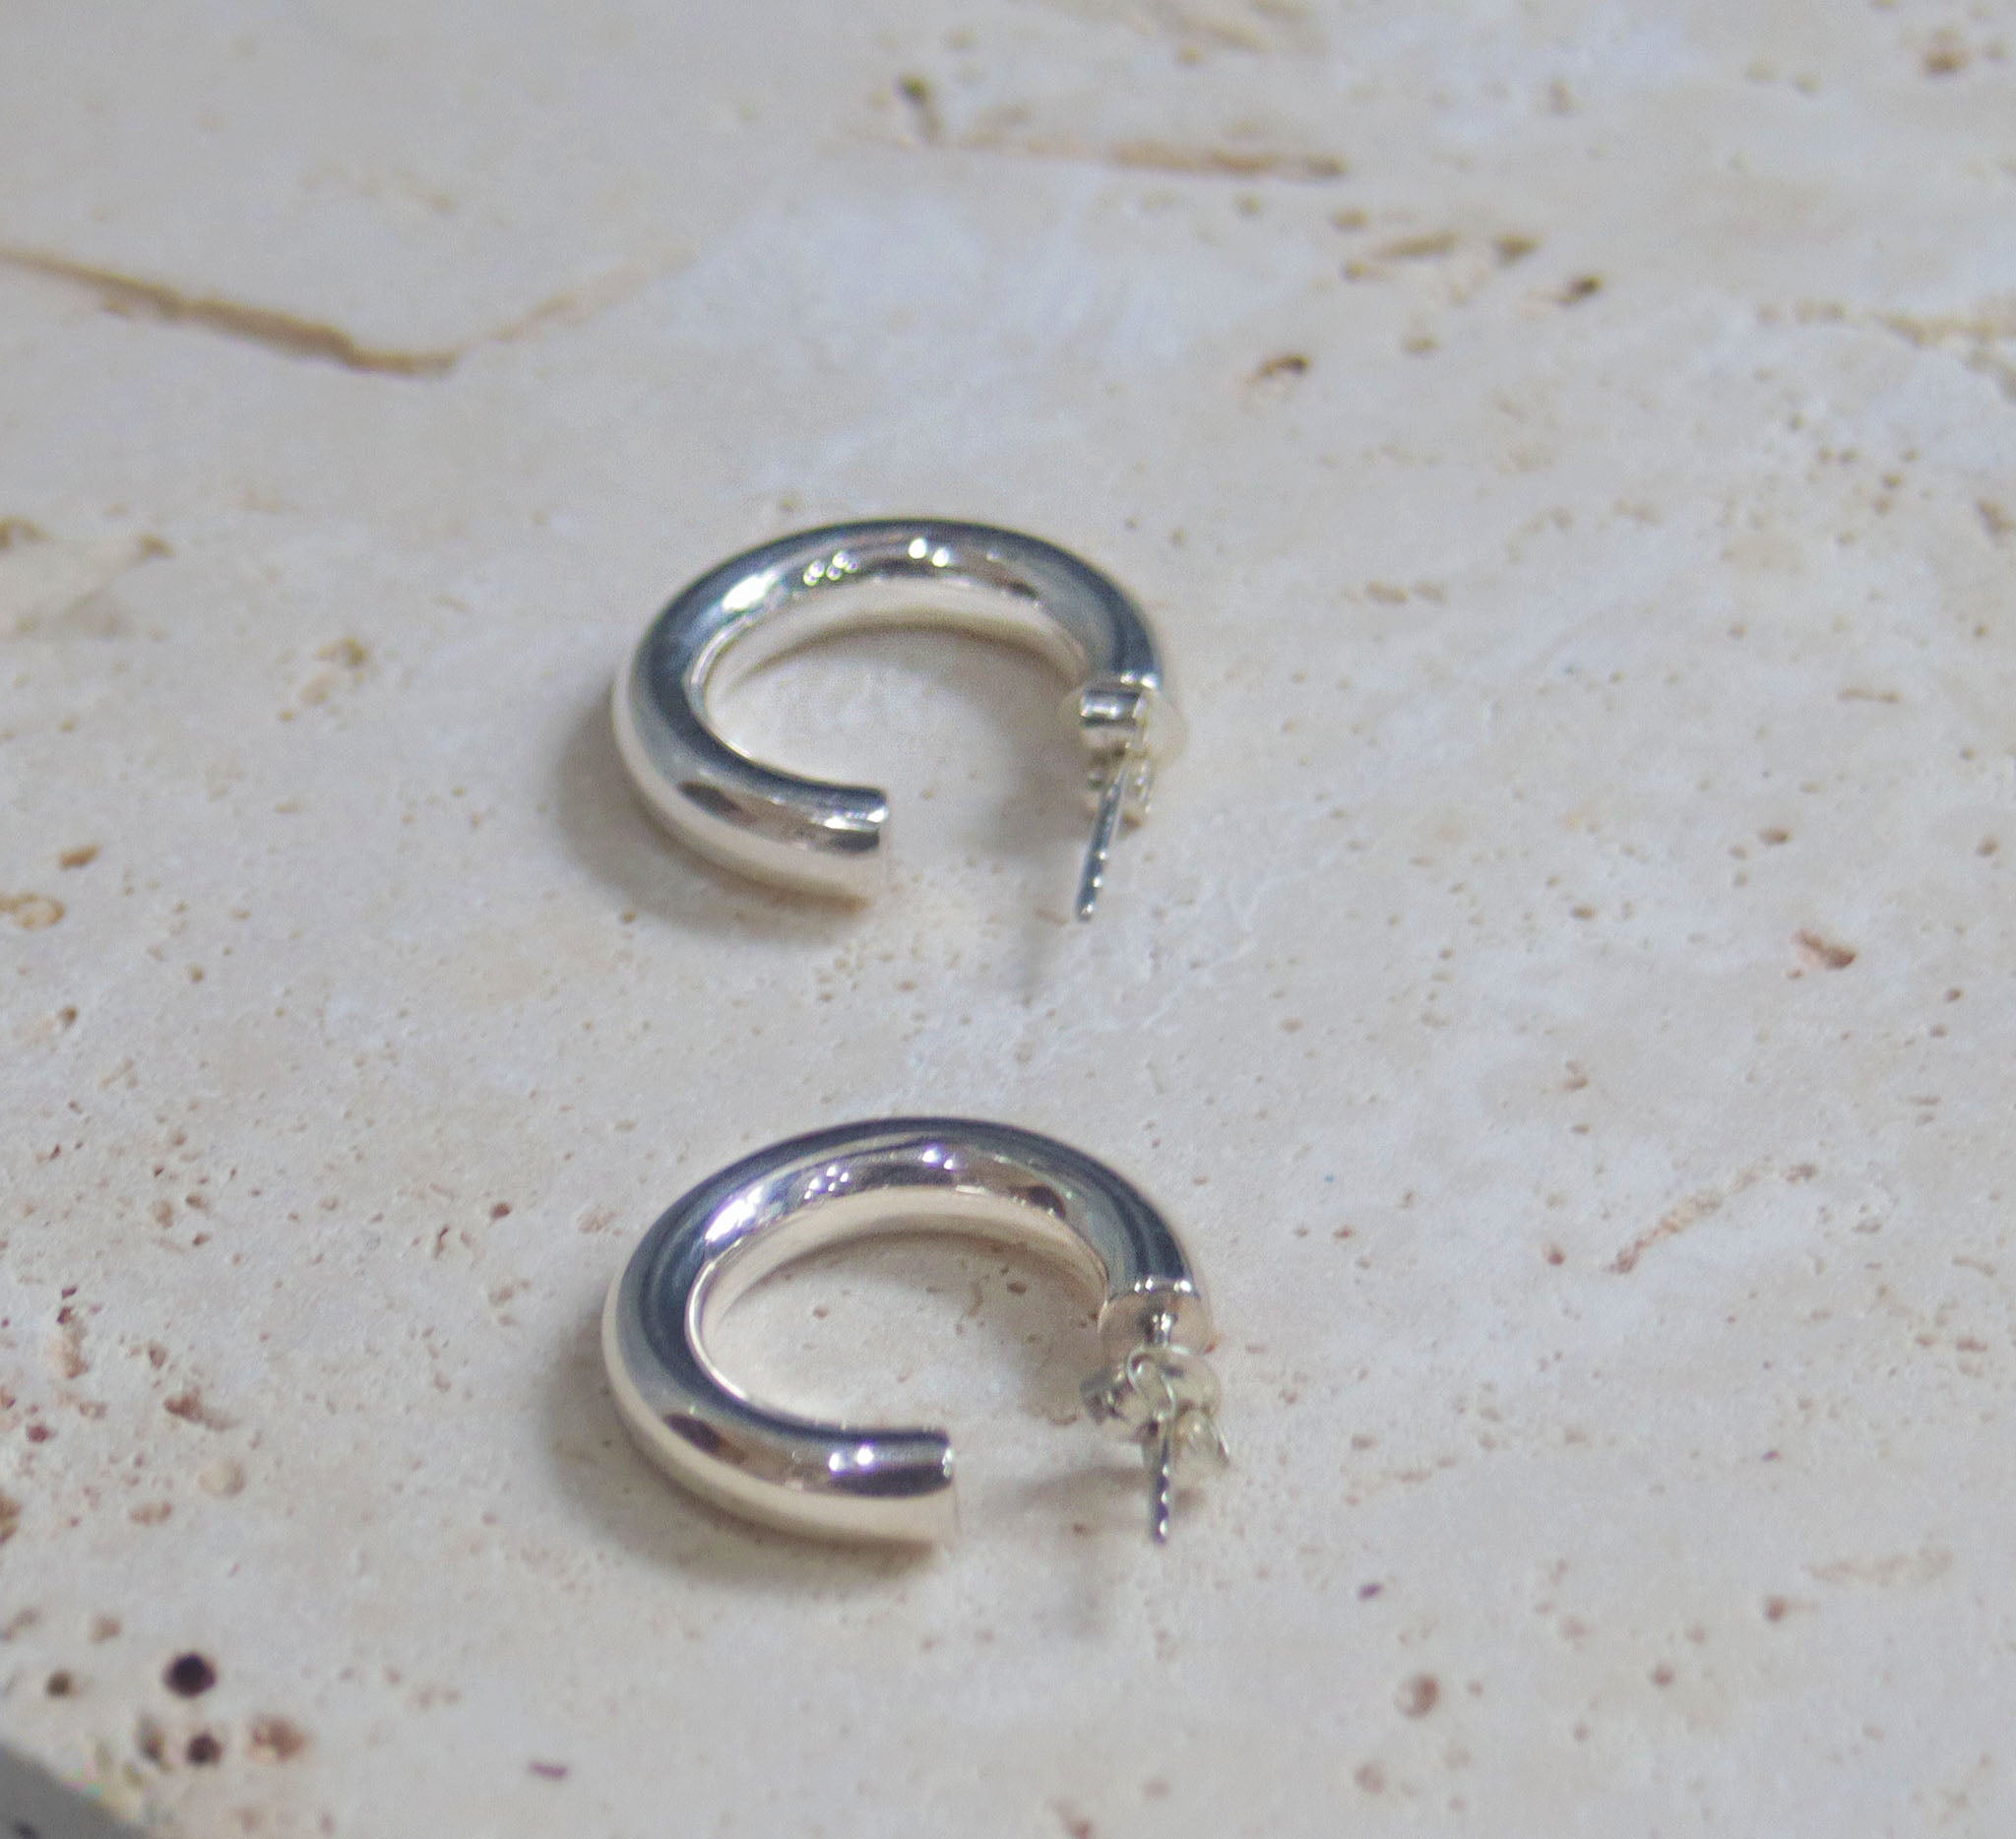 Thick Silver Hoop Earring - Simply Jewellery